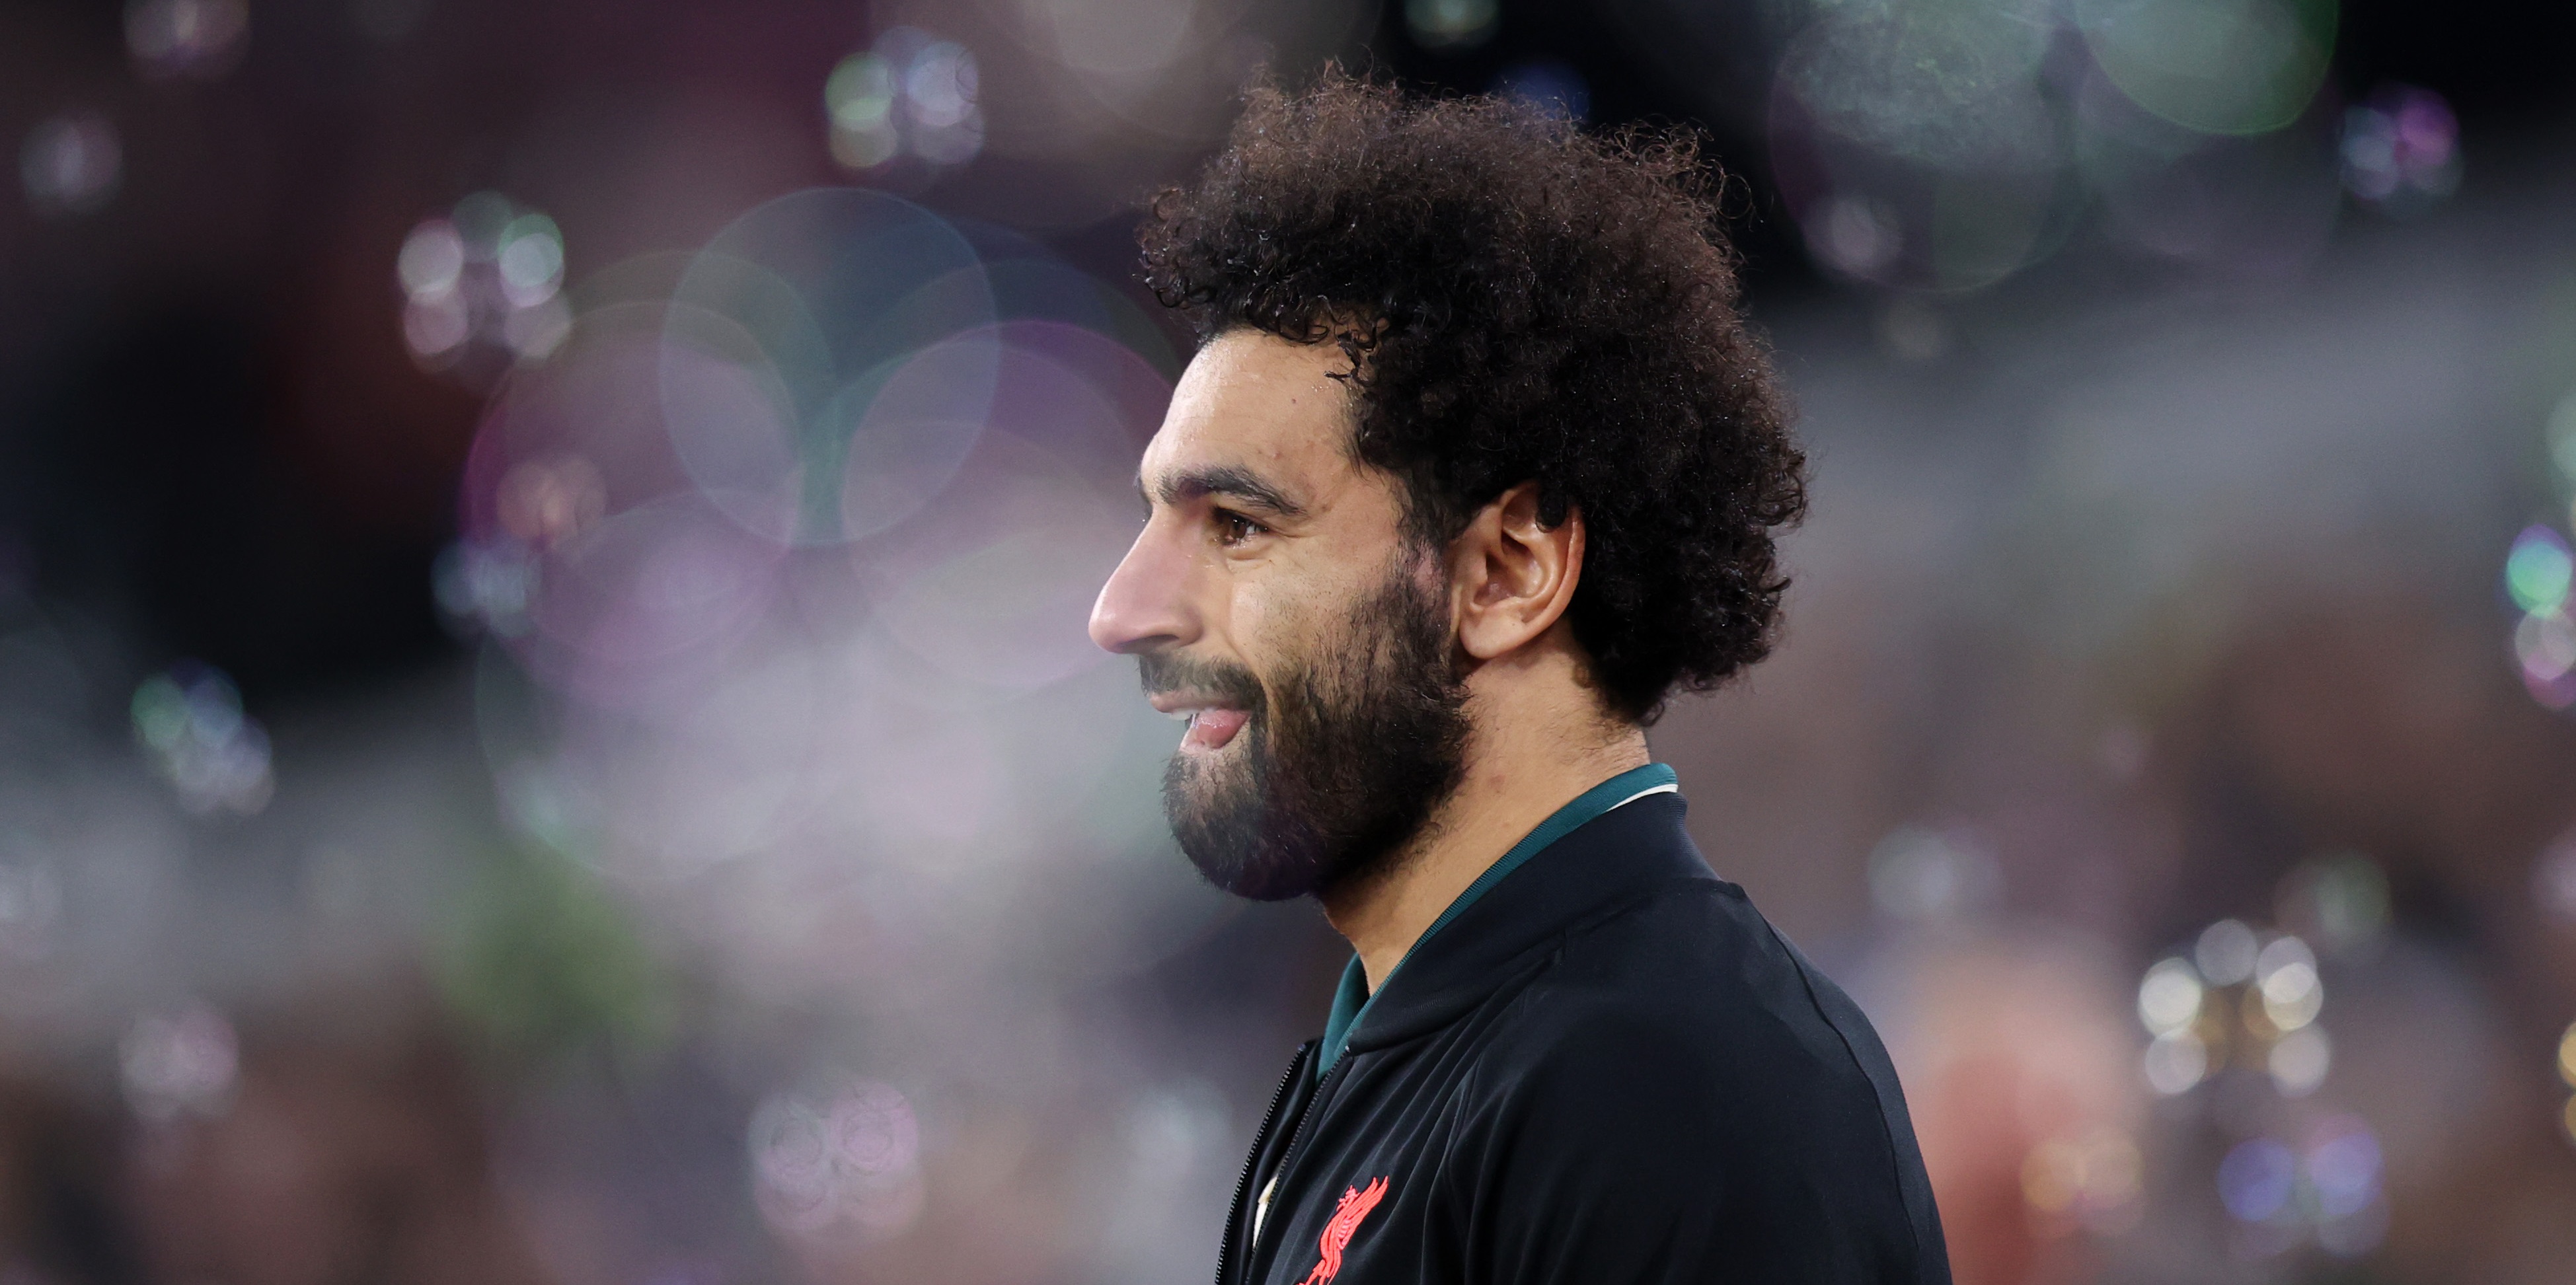 ‘Make us a silly offer’ – Liverpool could be tempted to sell Mo Salah, suggests Glen Johnson